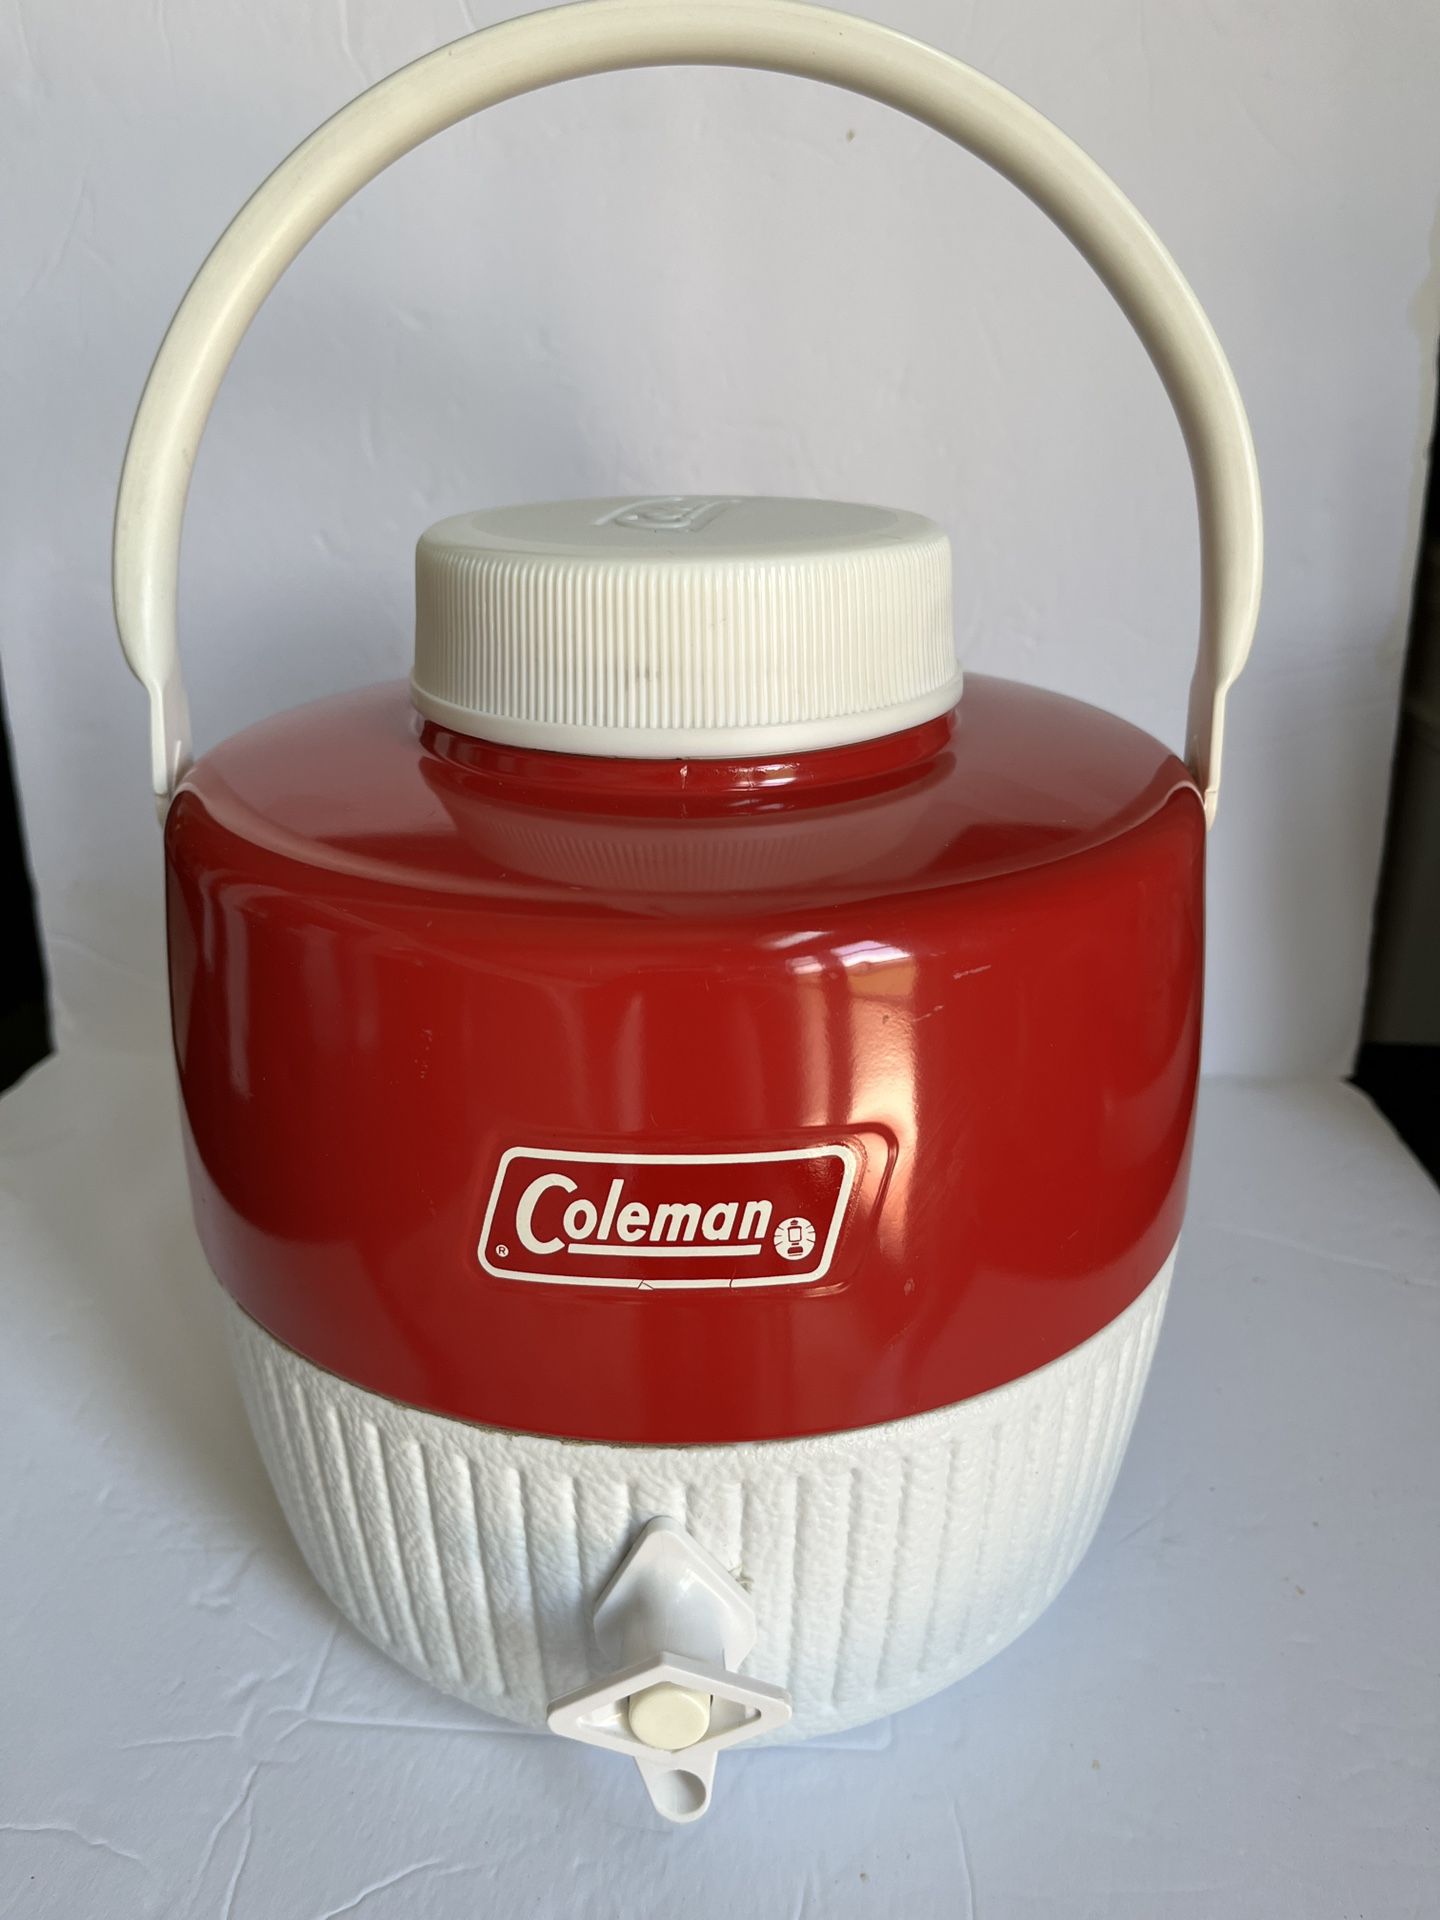 Vintage Coleman Malboro 1/2 Gallon Hot and Cold Thermos Water Beverage Jug.  for Sale in Valhalla, NY - OfferUp